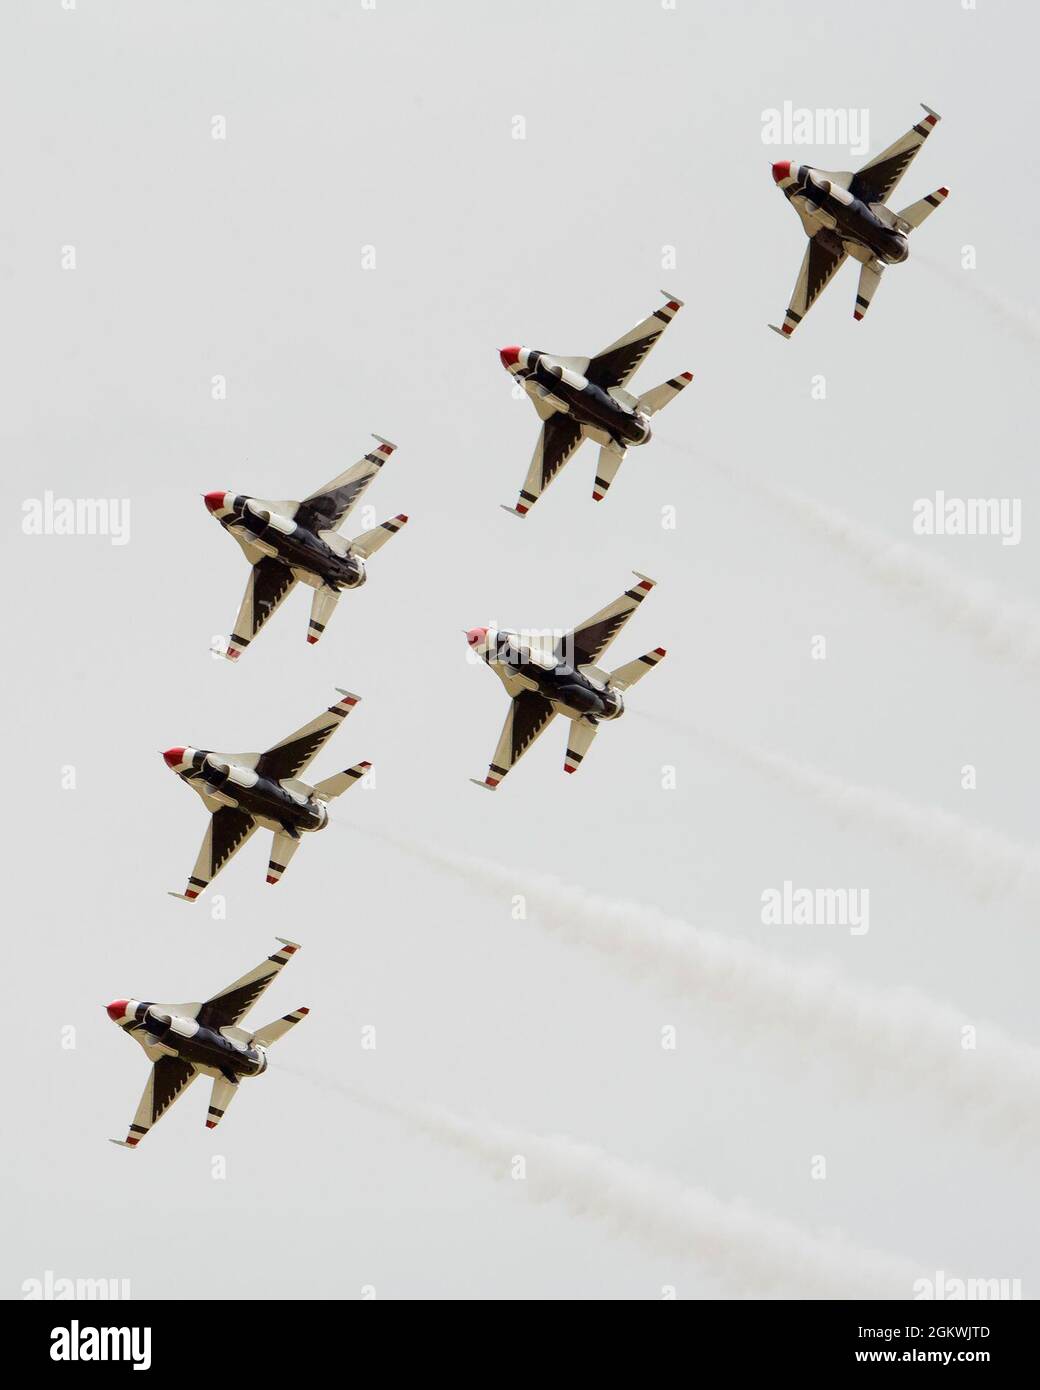 The U.S. Air Force Air Demonstration Team, The Thunderbirds, perform at the Dayton Air Show on July 10, 2021, at Dayton International Airport. The Thunderbirds version of the delta, shown here, put the fighter aircraft as close as 18 inches apart from each other flying at roughly 500 miles per hour. Stock Photo